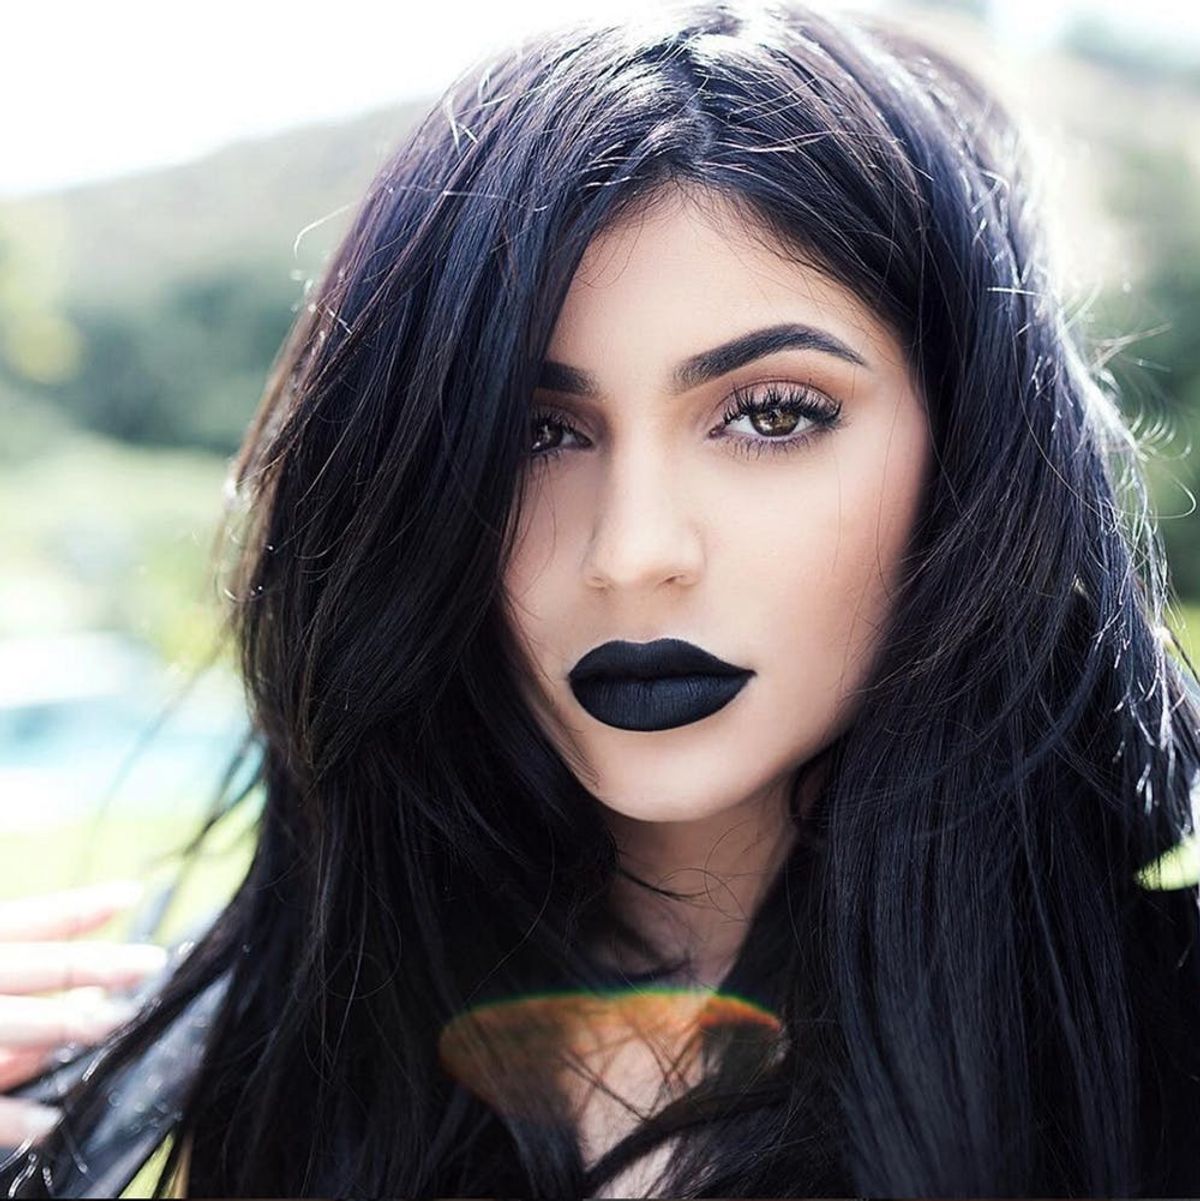 Why Kylie’s Makeup Business Could Be in Serious Trouble